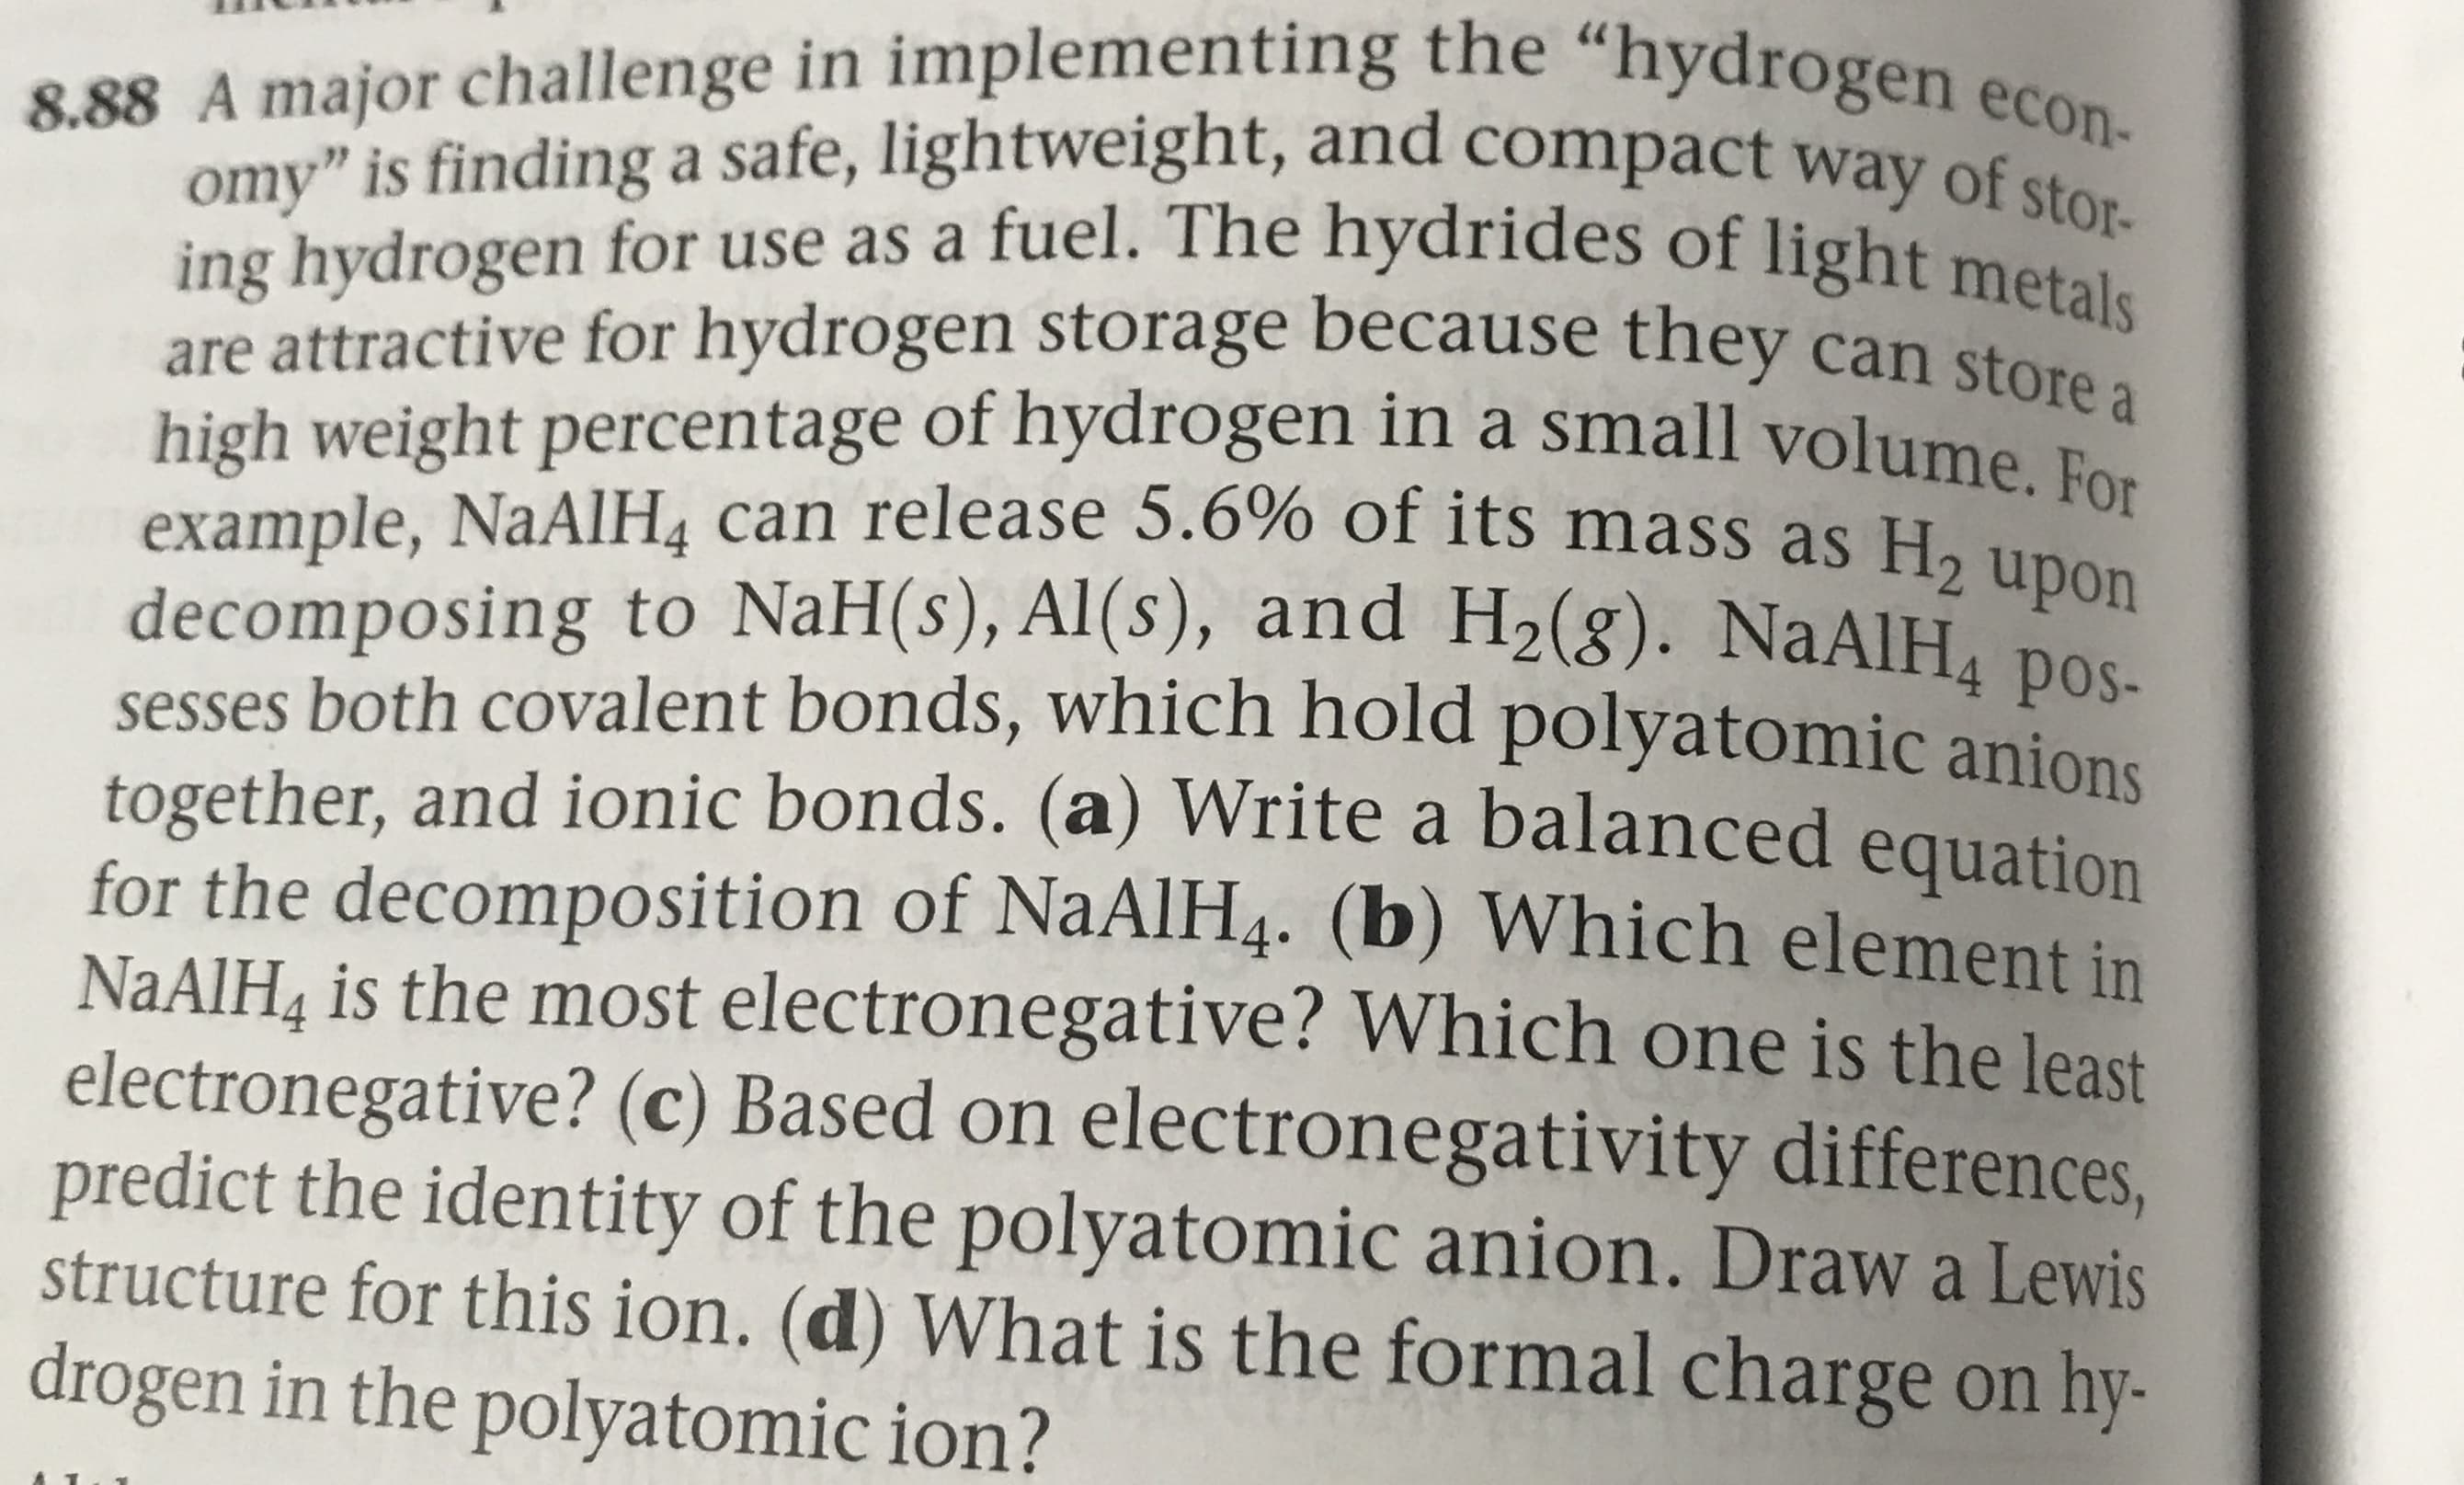 8.88 A major challenge in implementing the "hydrogen econ-
omy" is finding a safe, lightweight, and compact way of stor-
ing hydrogen for use as a fuel. The hydrides of light metals
are attractive for hydrogen storage because they can store a
high weight percentage of hydrogen in a small volume
example, NaAlH4 can release 5.6% of its mass as H2 upon
decomposing to NaH(s), Al(s), and H2(g). NaAlH4 pos-
sesses both covalent bonds, which hold polyatomic anions
together, and ionic bonds. (a) Write a balanced equation
for the decomposition of NaAlH4. (b) Which element in
NAAIH& is the most electronegative? Which one is the least
electronegative? (c) Based on electronegativity differences,
predict the identity of the polyatomic anion. Draw a Lewis
structure for this ion. (d) What is the formal charge on hy-
drogen in the polyatomic ion?
